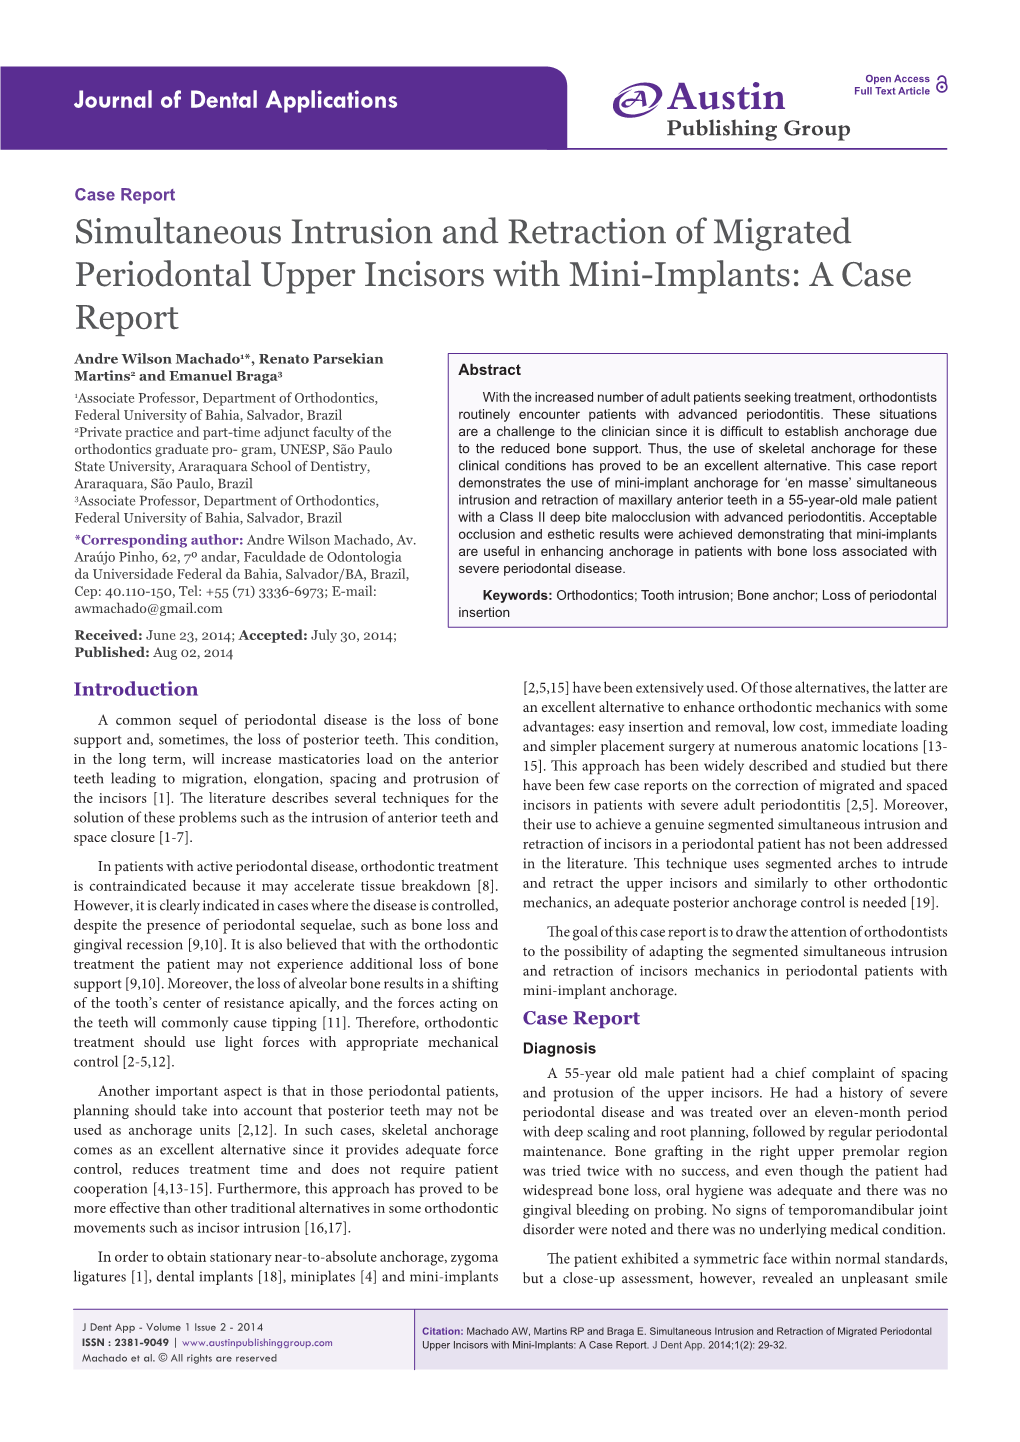 Simultaneous Intrusion and Retraction of Migrated Periodontal Upper Incisors with Mini-Implants: a Case Report